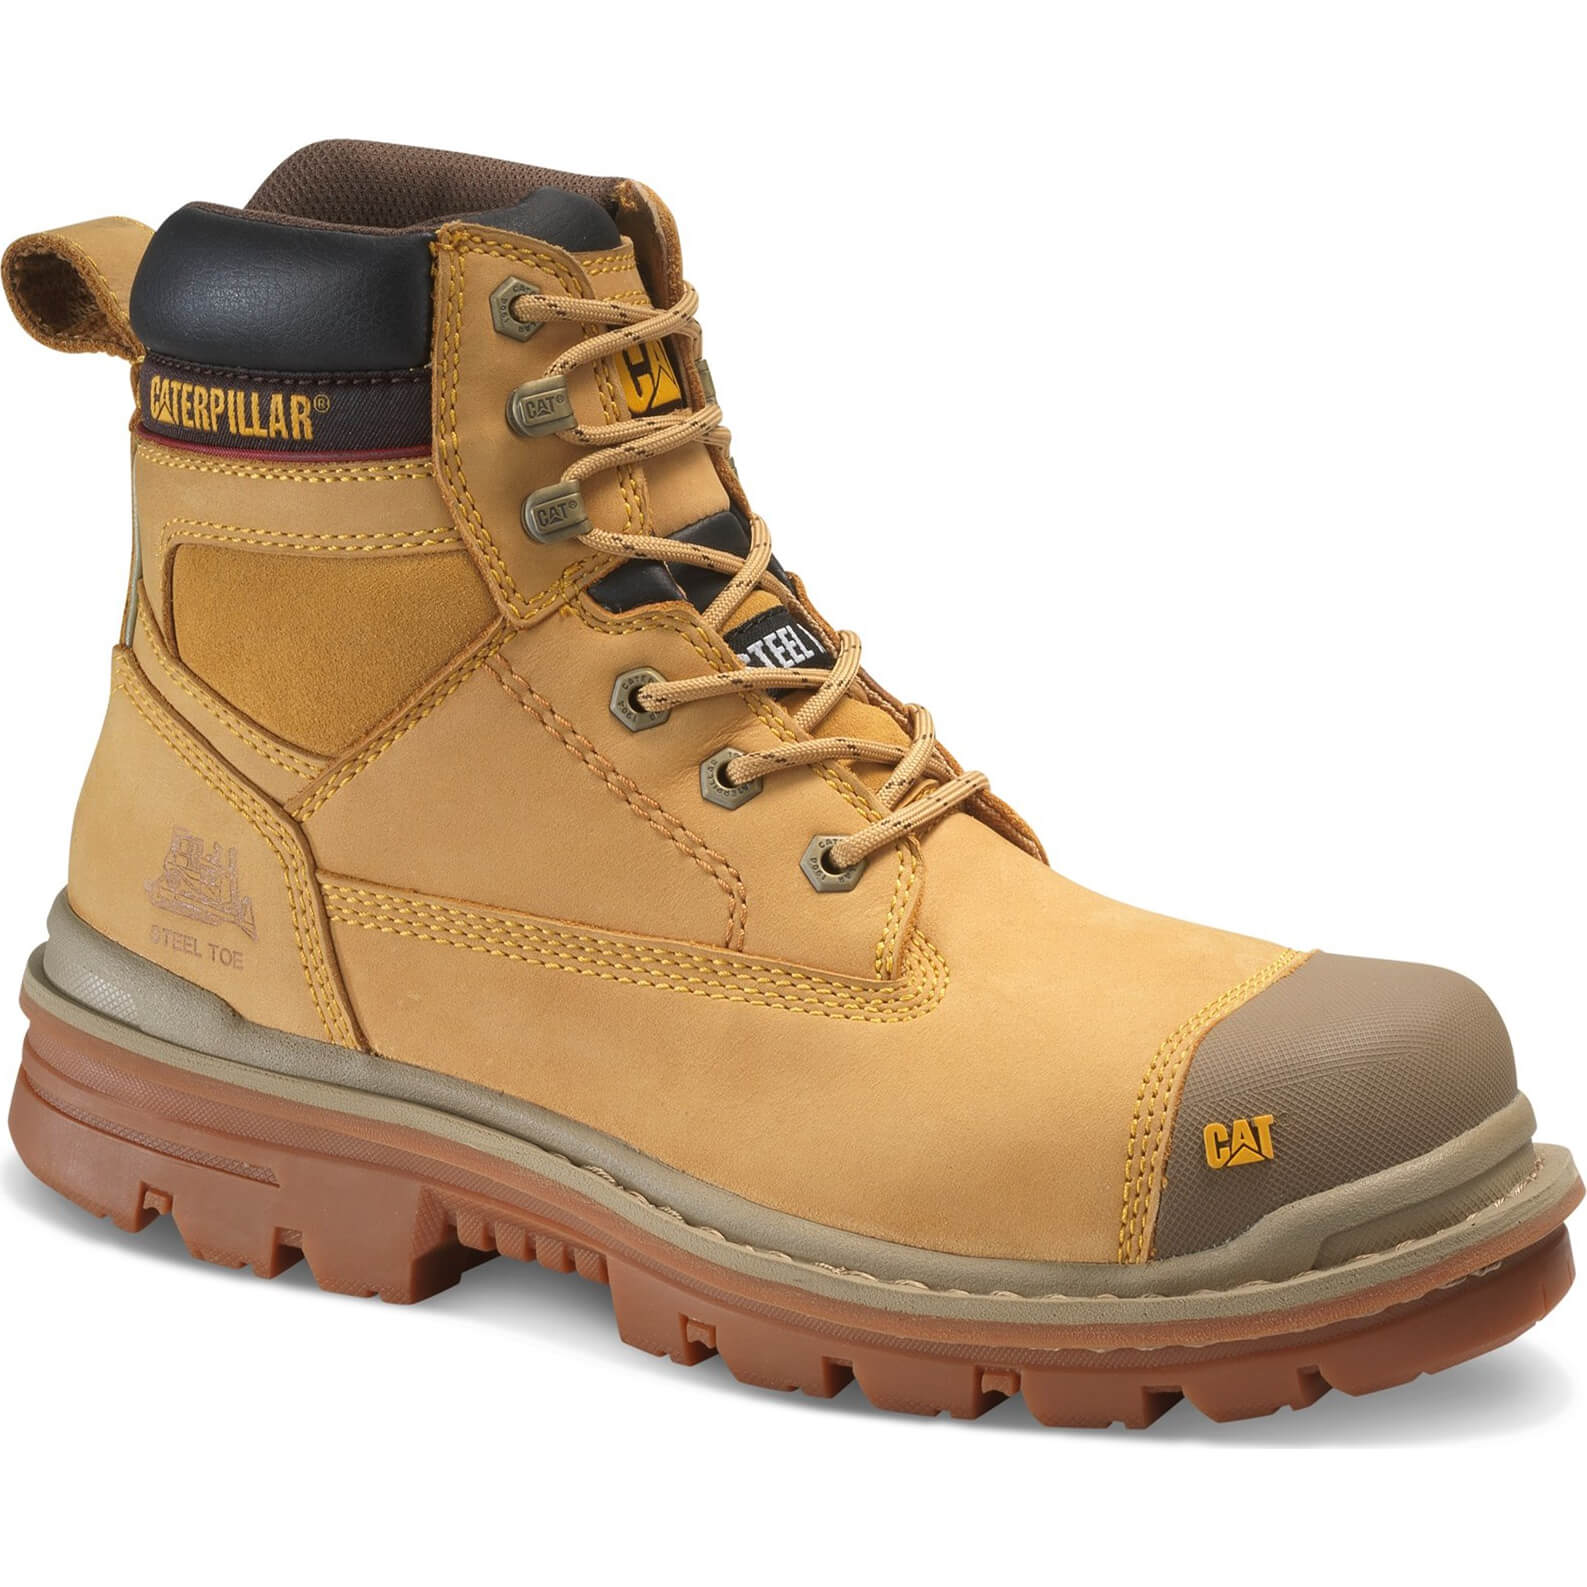 Image of Caterpillar Mens Gravel Safety Boots Honey Size 6